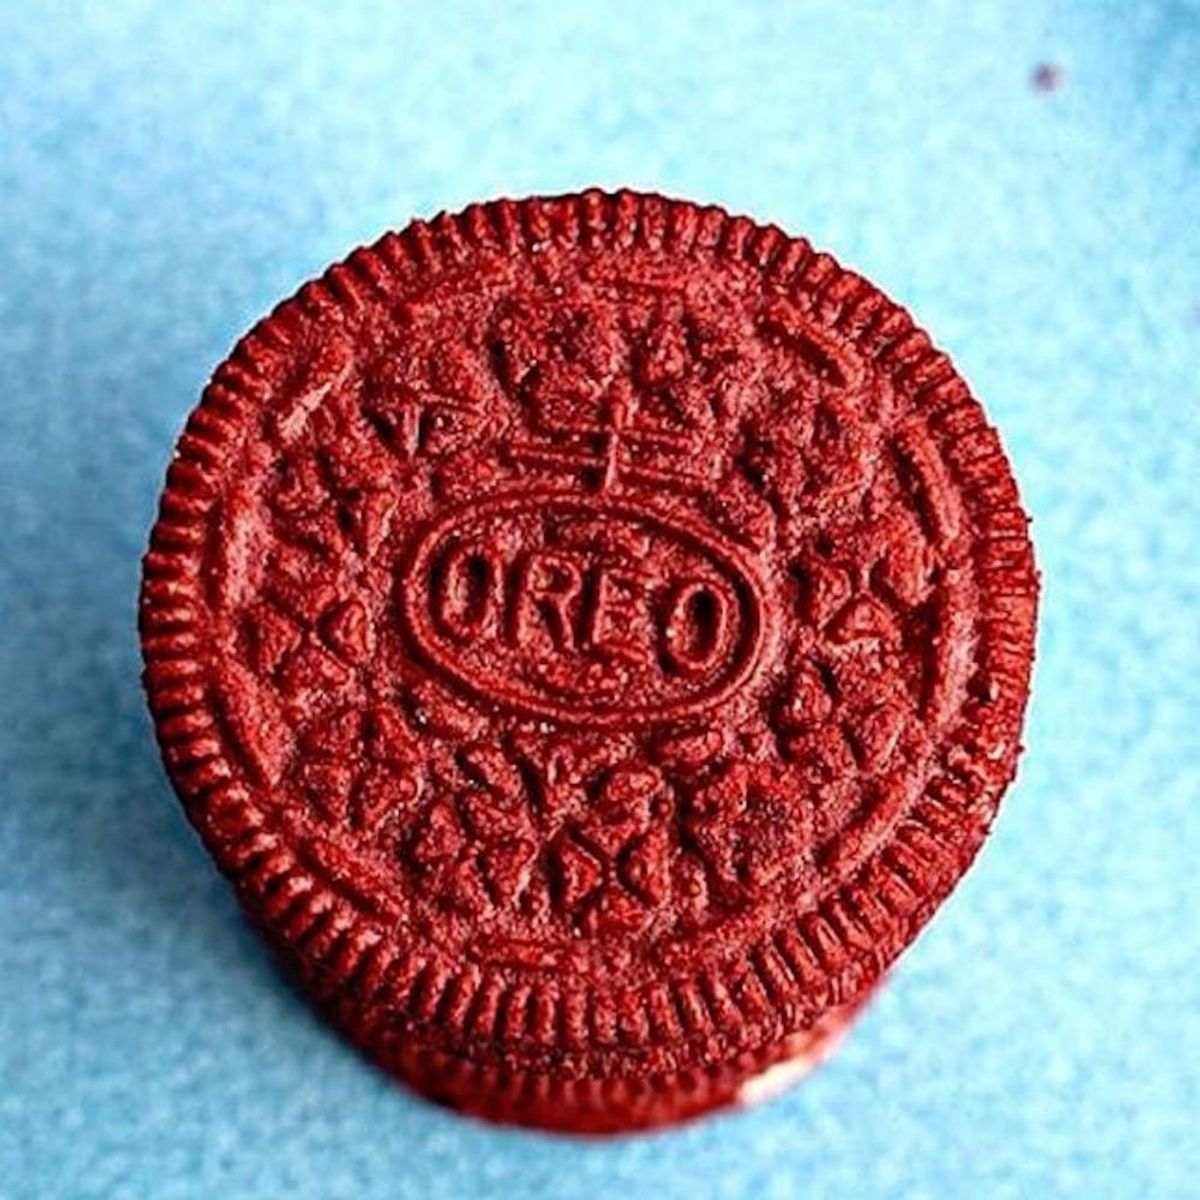 21 Crazy Oreo Flavors Ranked from Worst to Best